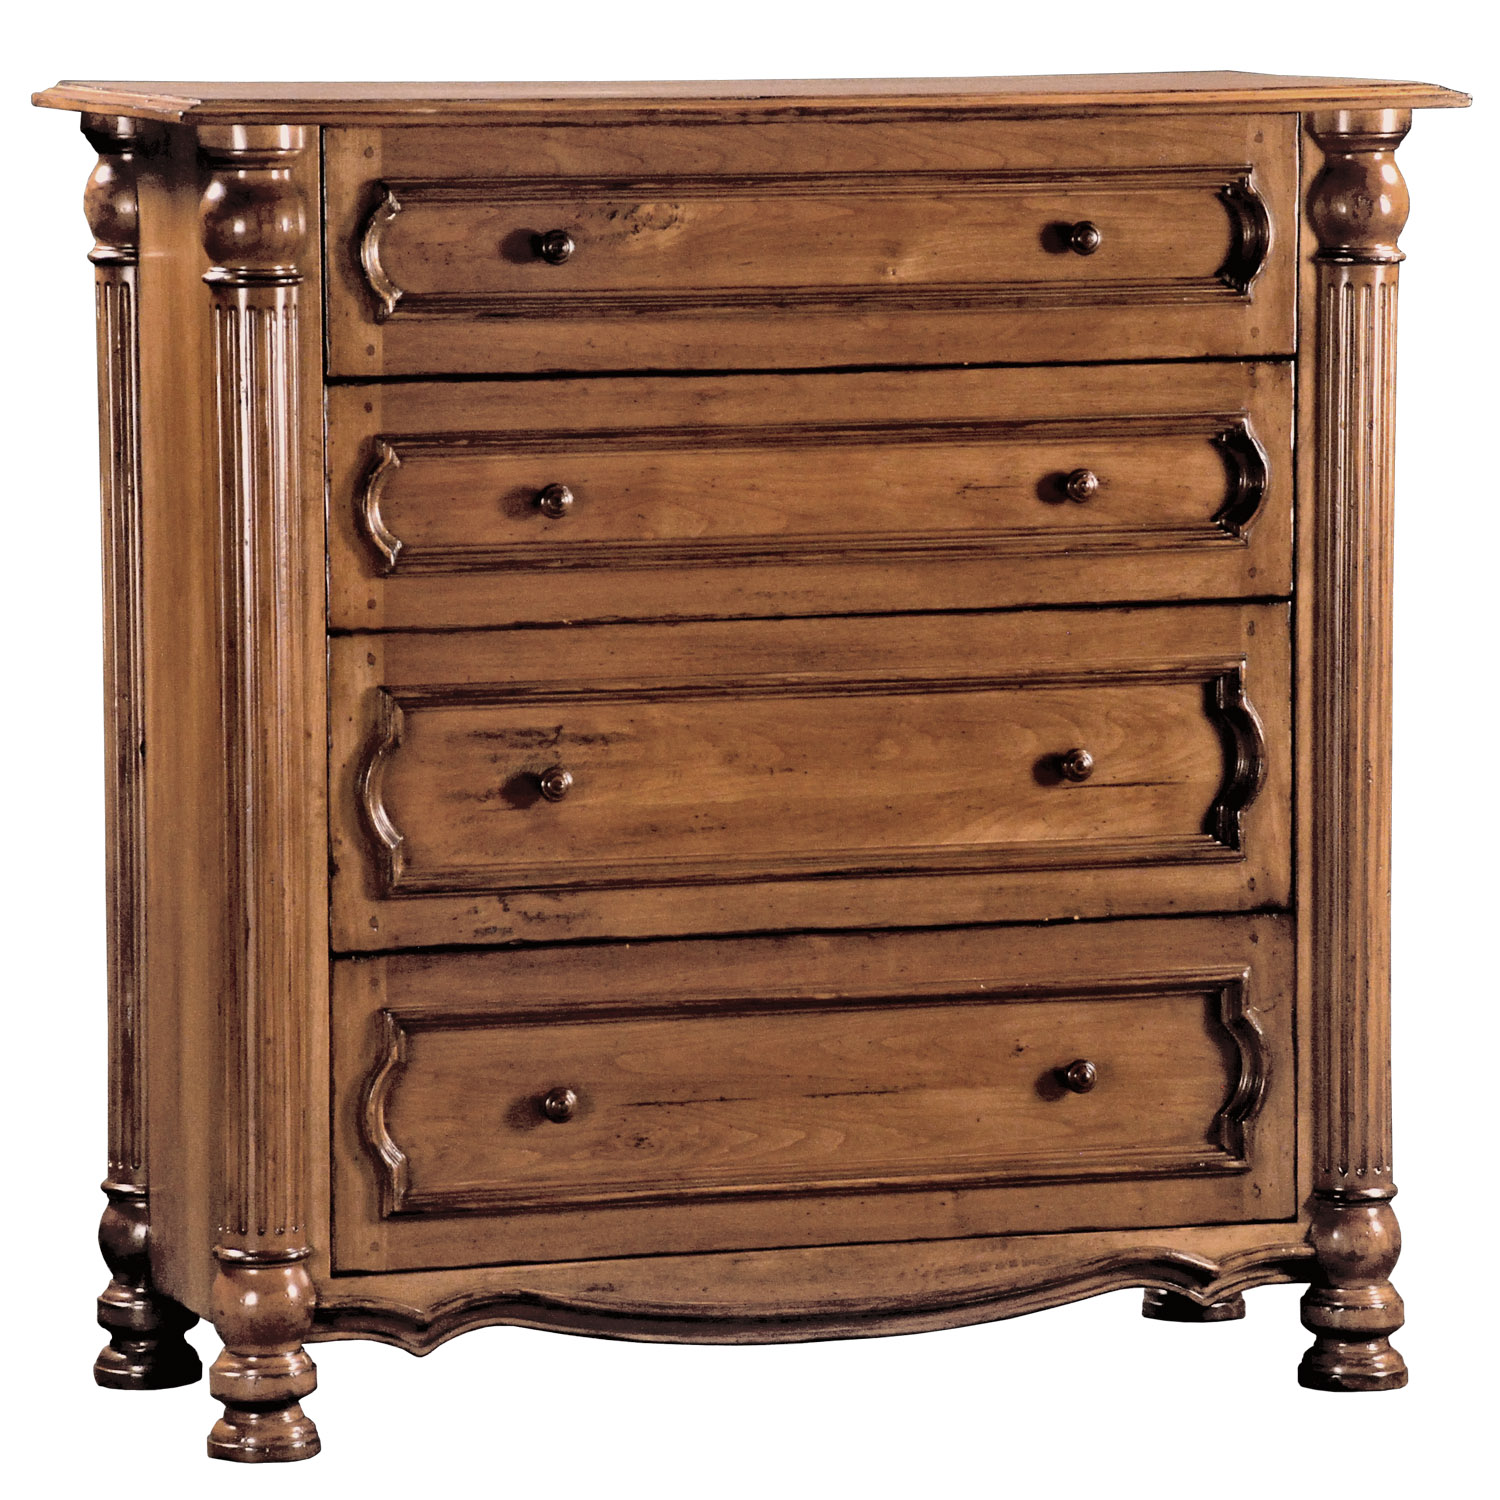 Belmont traditional chest of drawers dresser by Woodland furniture in Idaho Falls